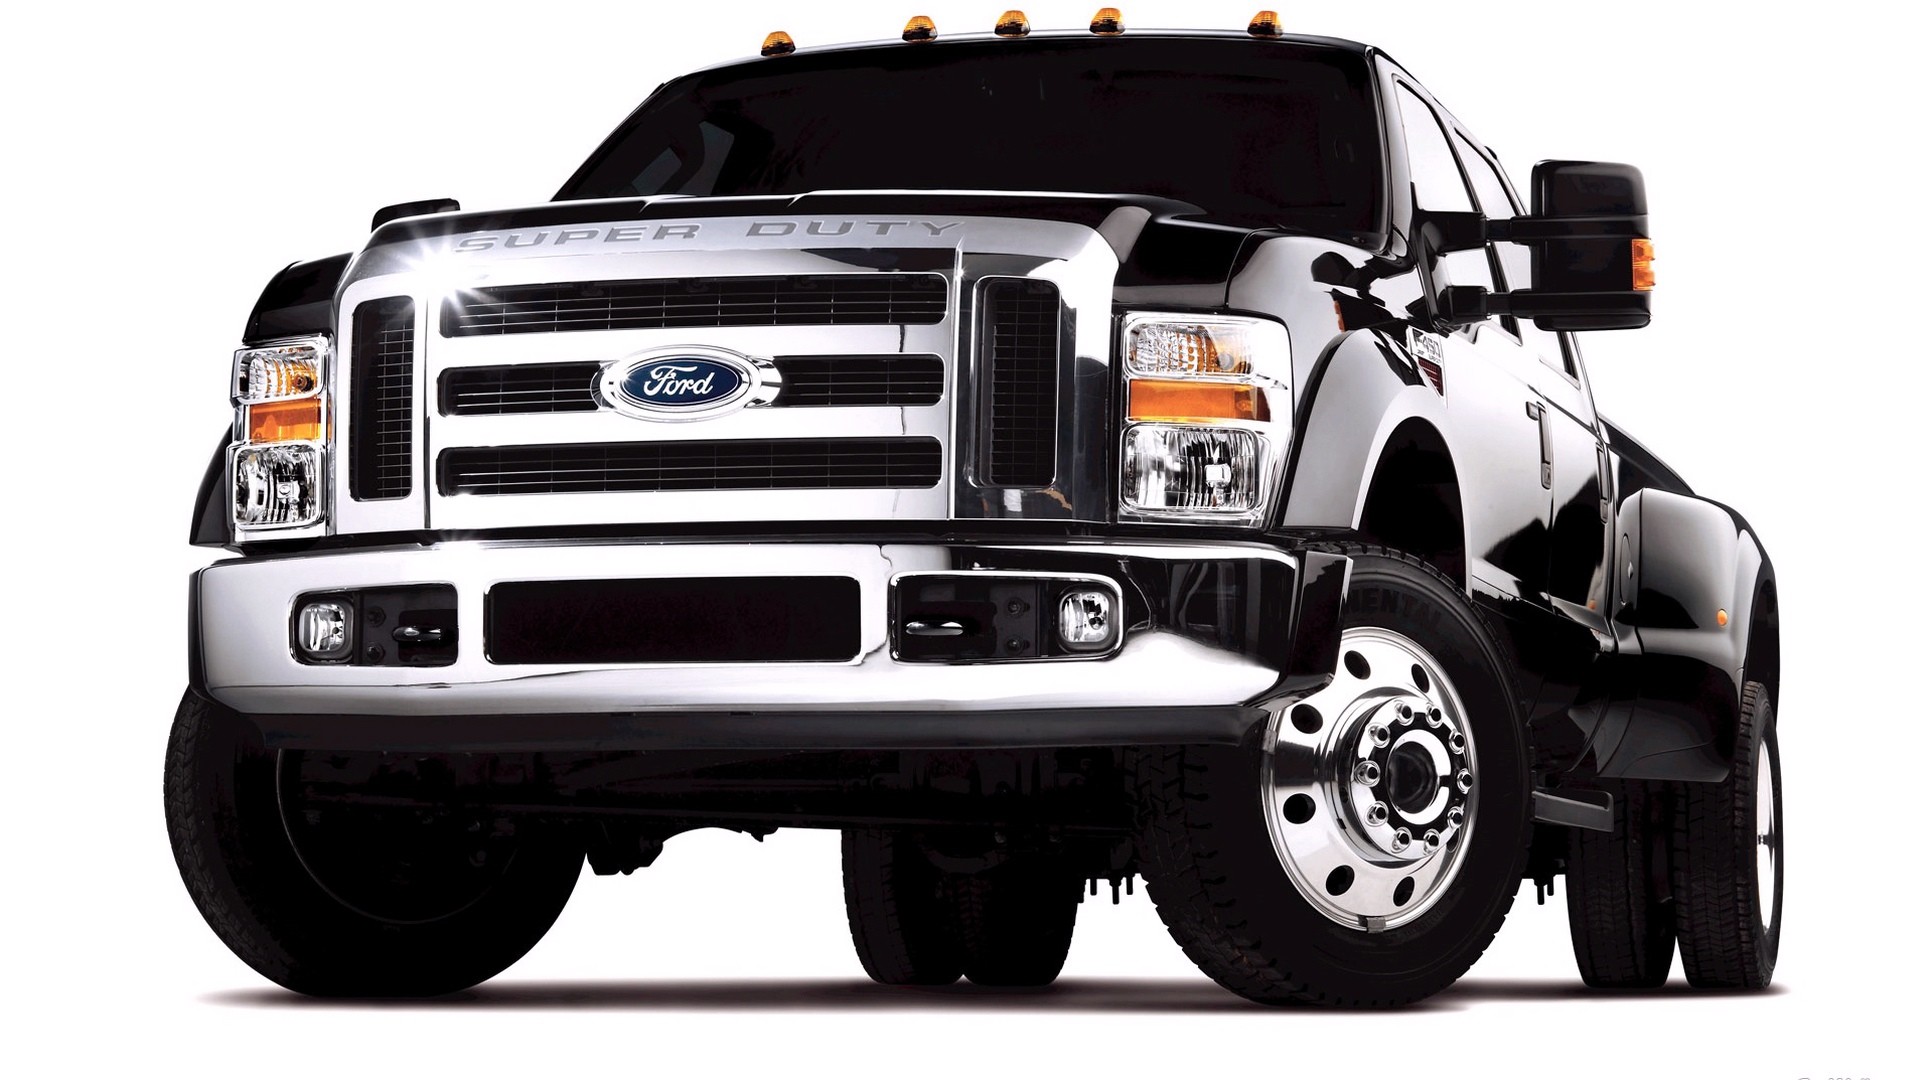 1920x1080 New Ford Truck Photos View #806210 Wallpapers | RiseWLP